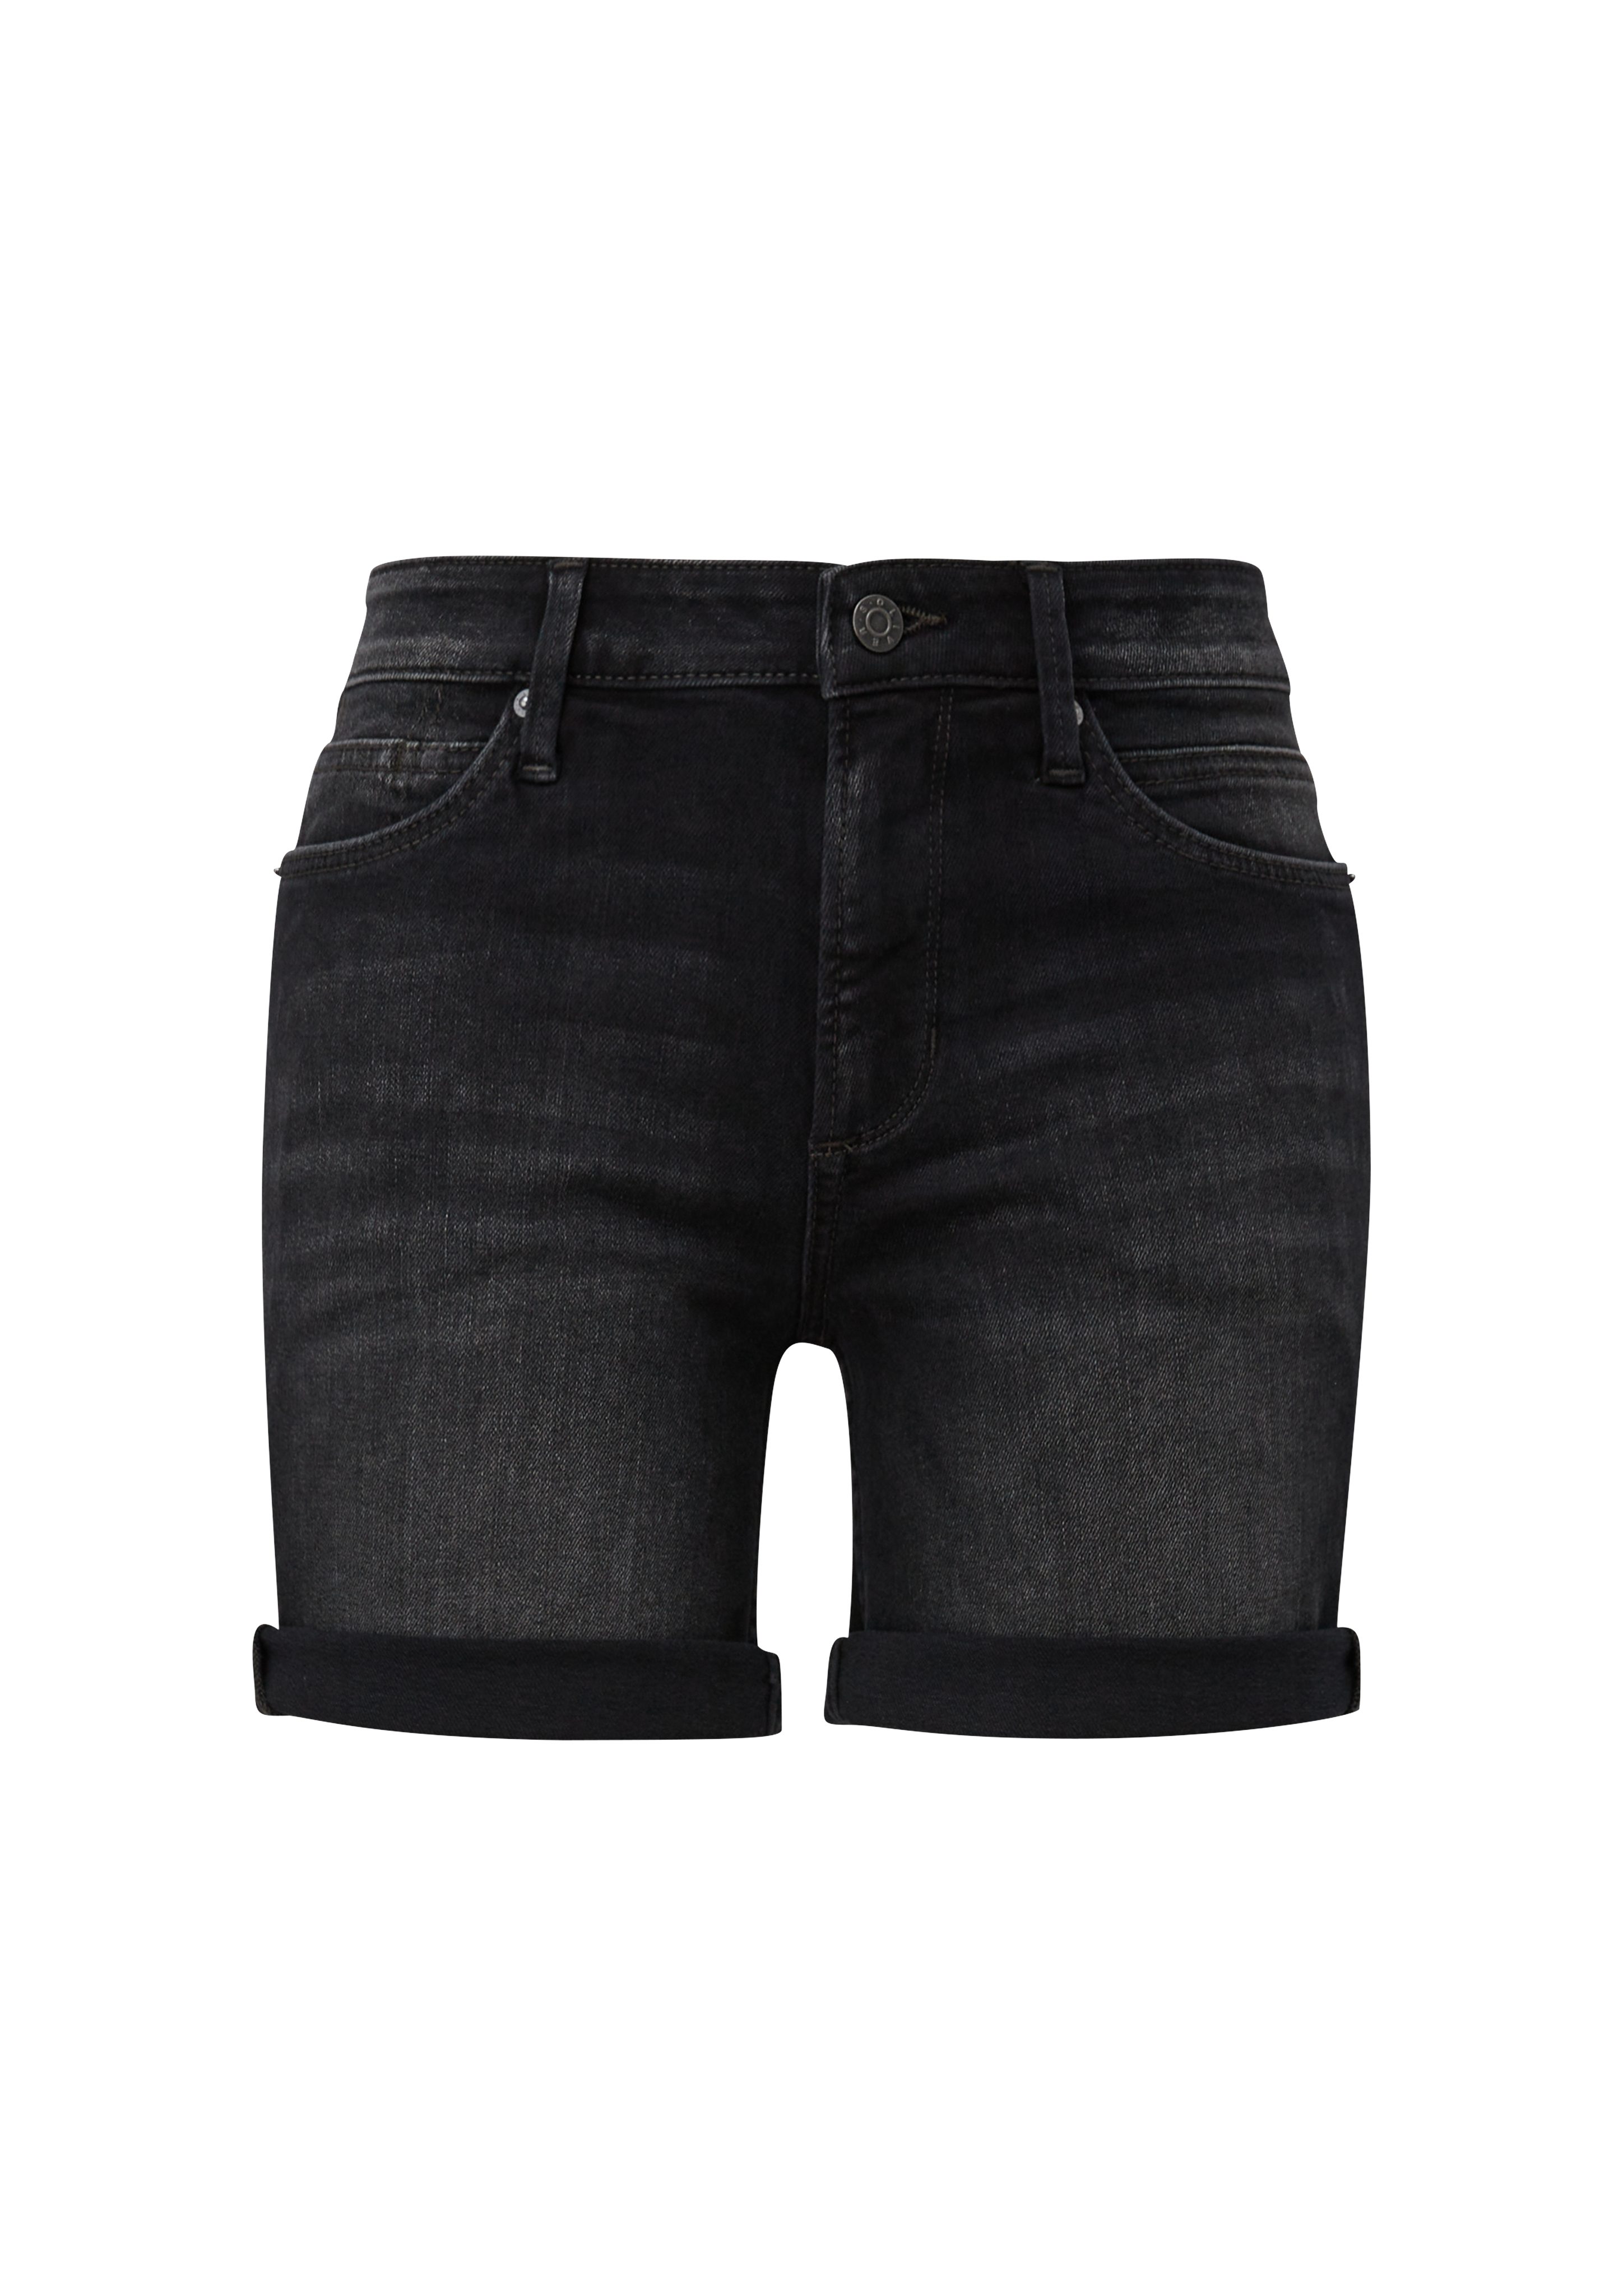 Jeansshorts / s.Oliver Slim Rise Waschung / Leg Mid / Jeans-Shorts Fit Slim Betsy